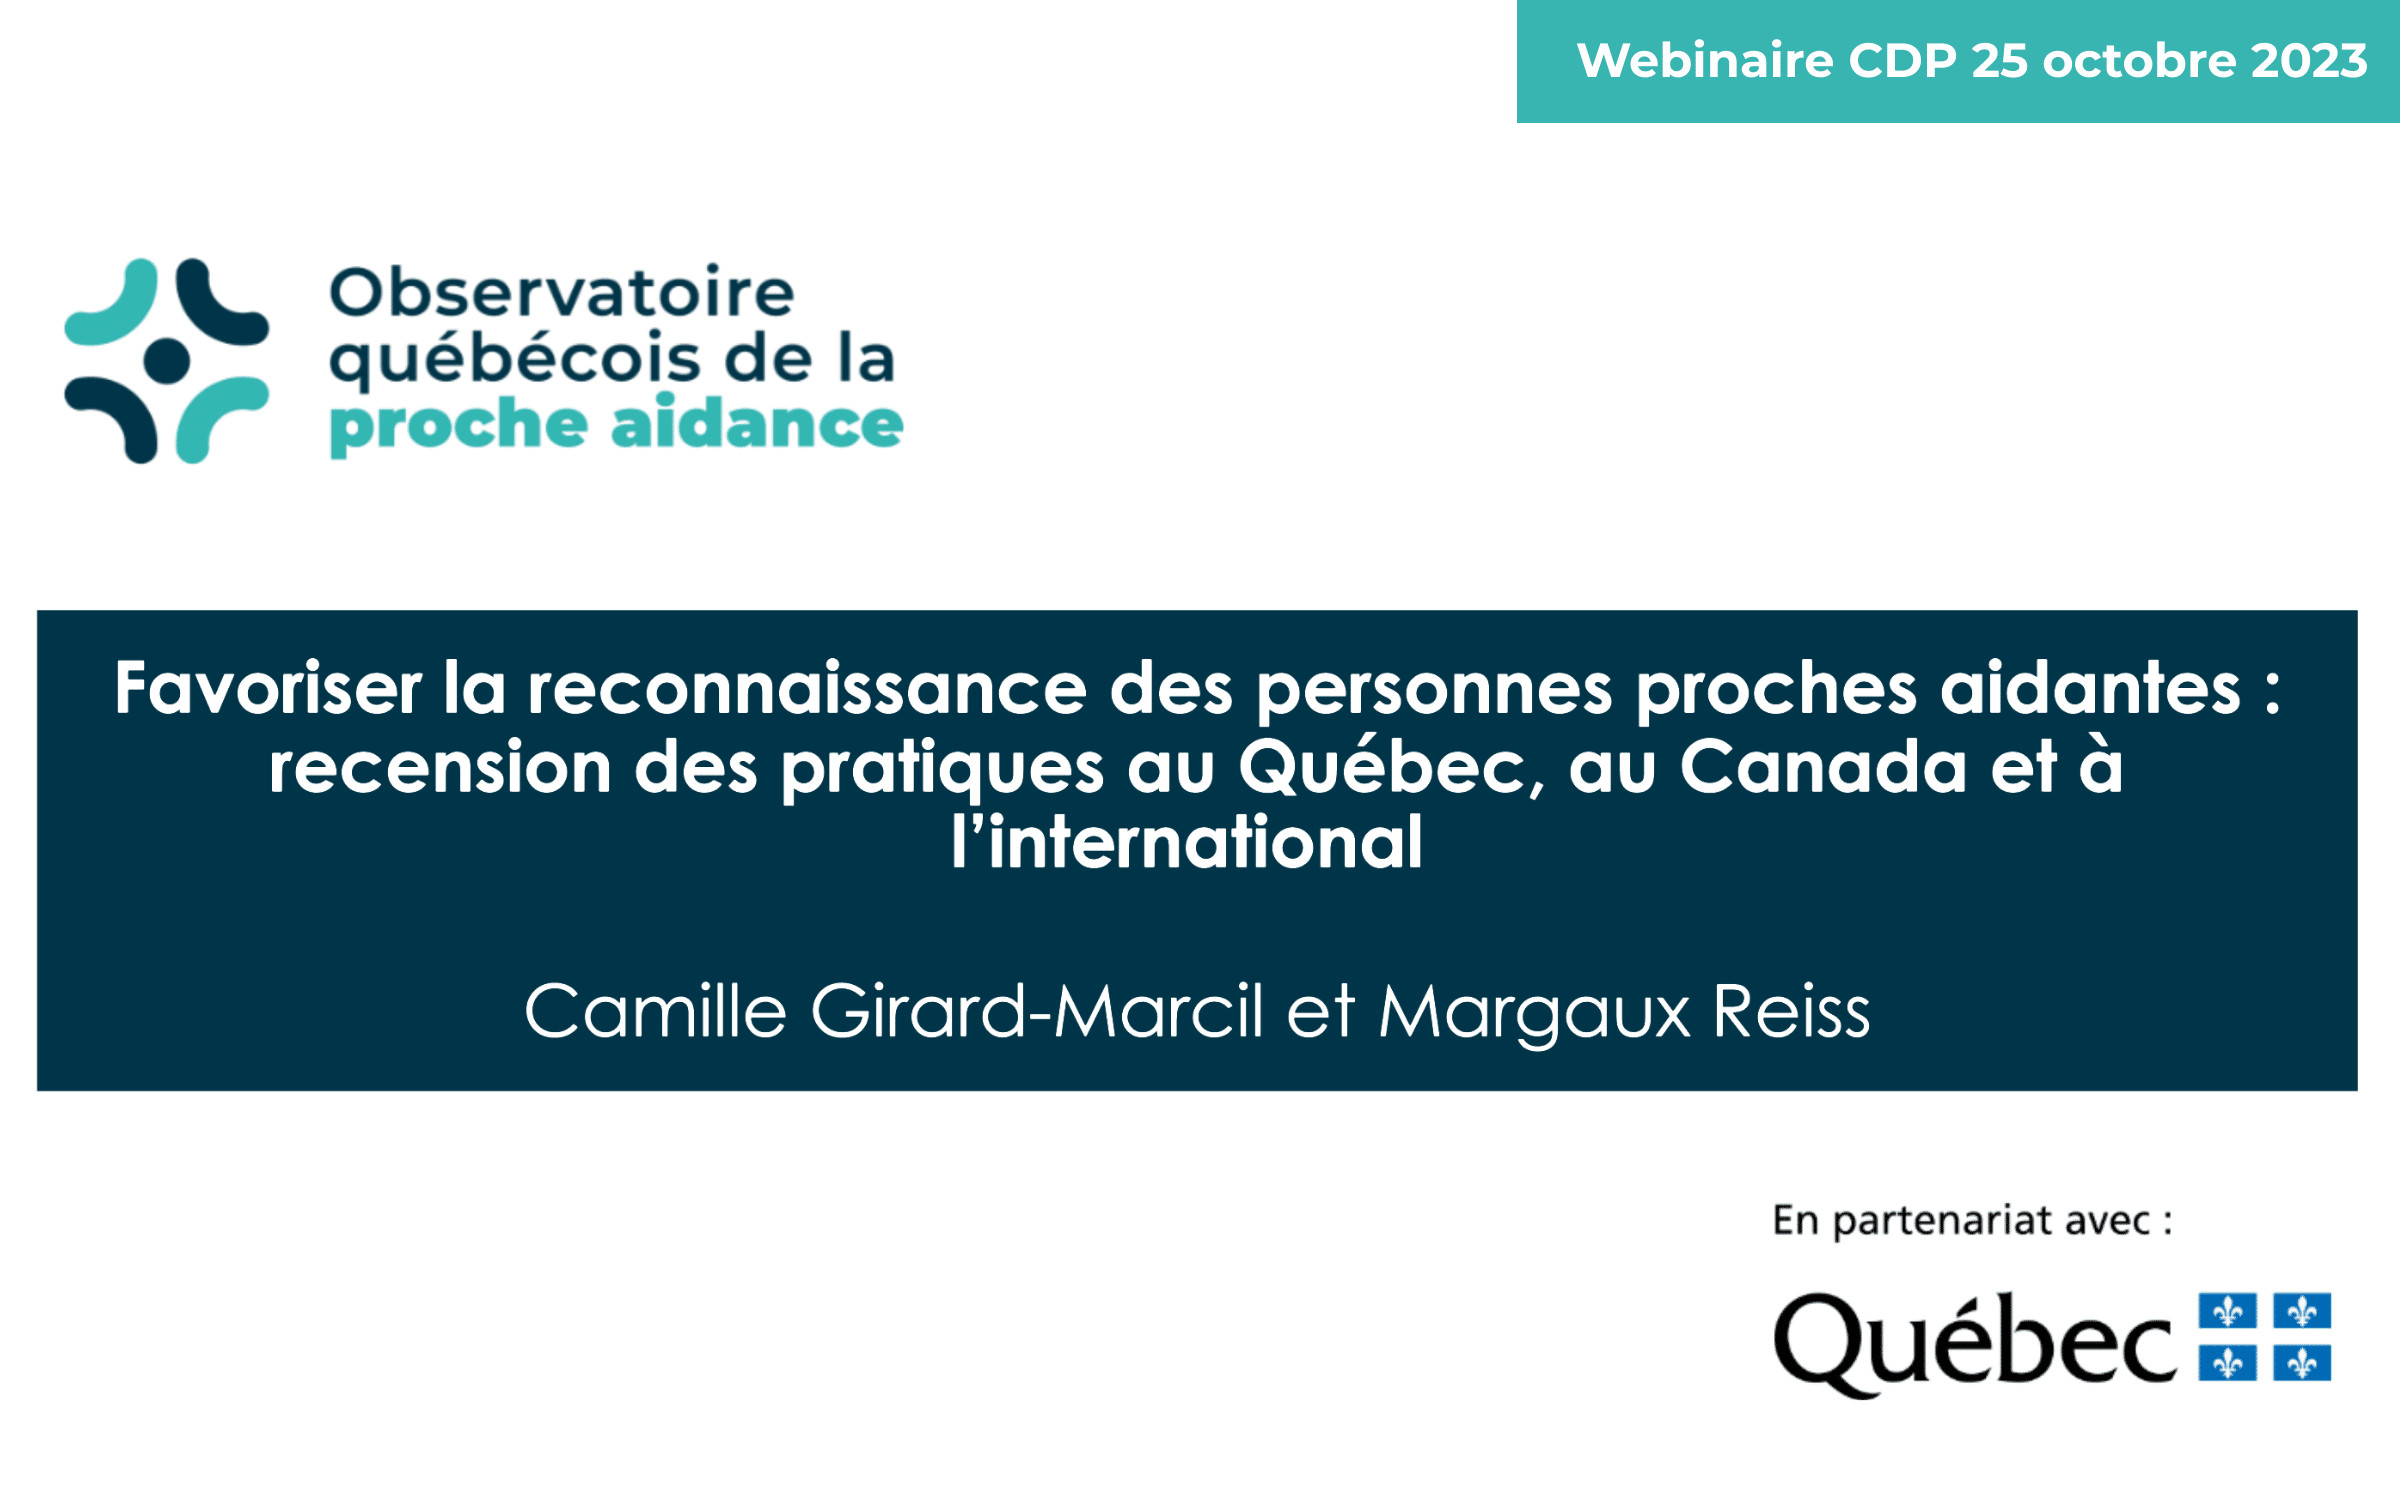 Webinar: Promoting the Recognition of Caregivers: A Review of Practices in Quebec, Canada, and Abroad